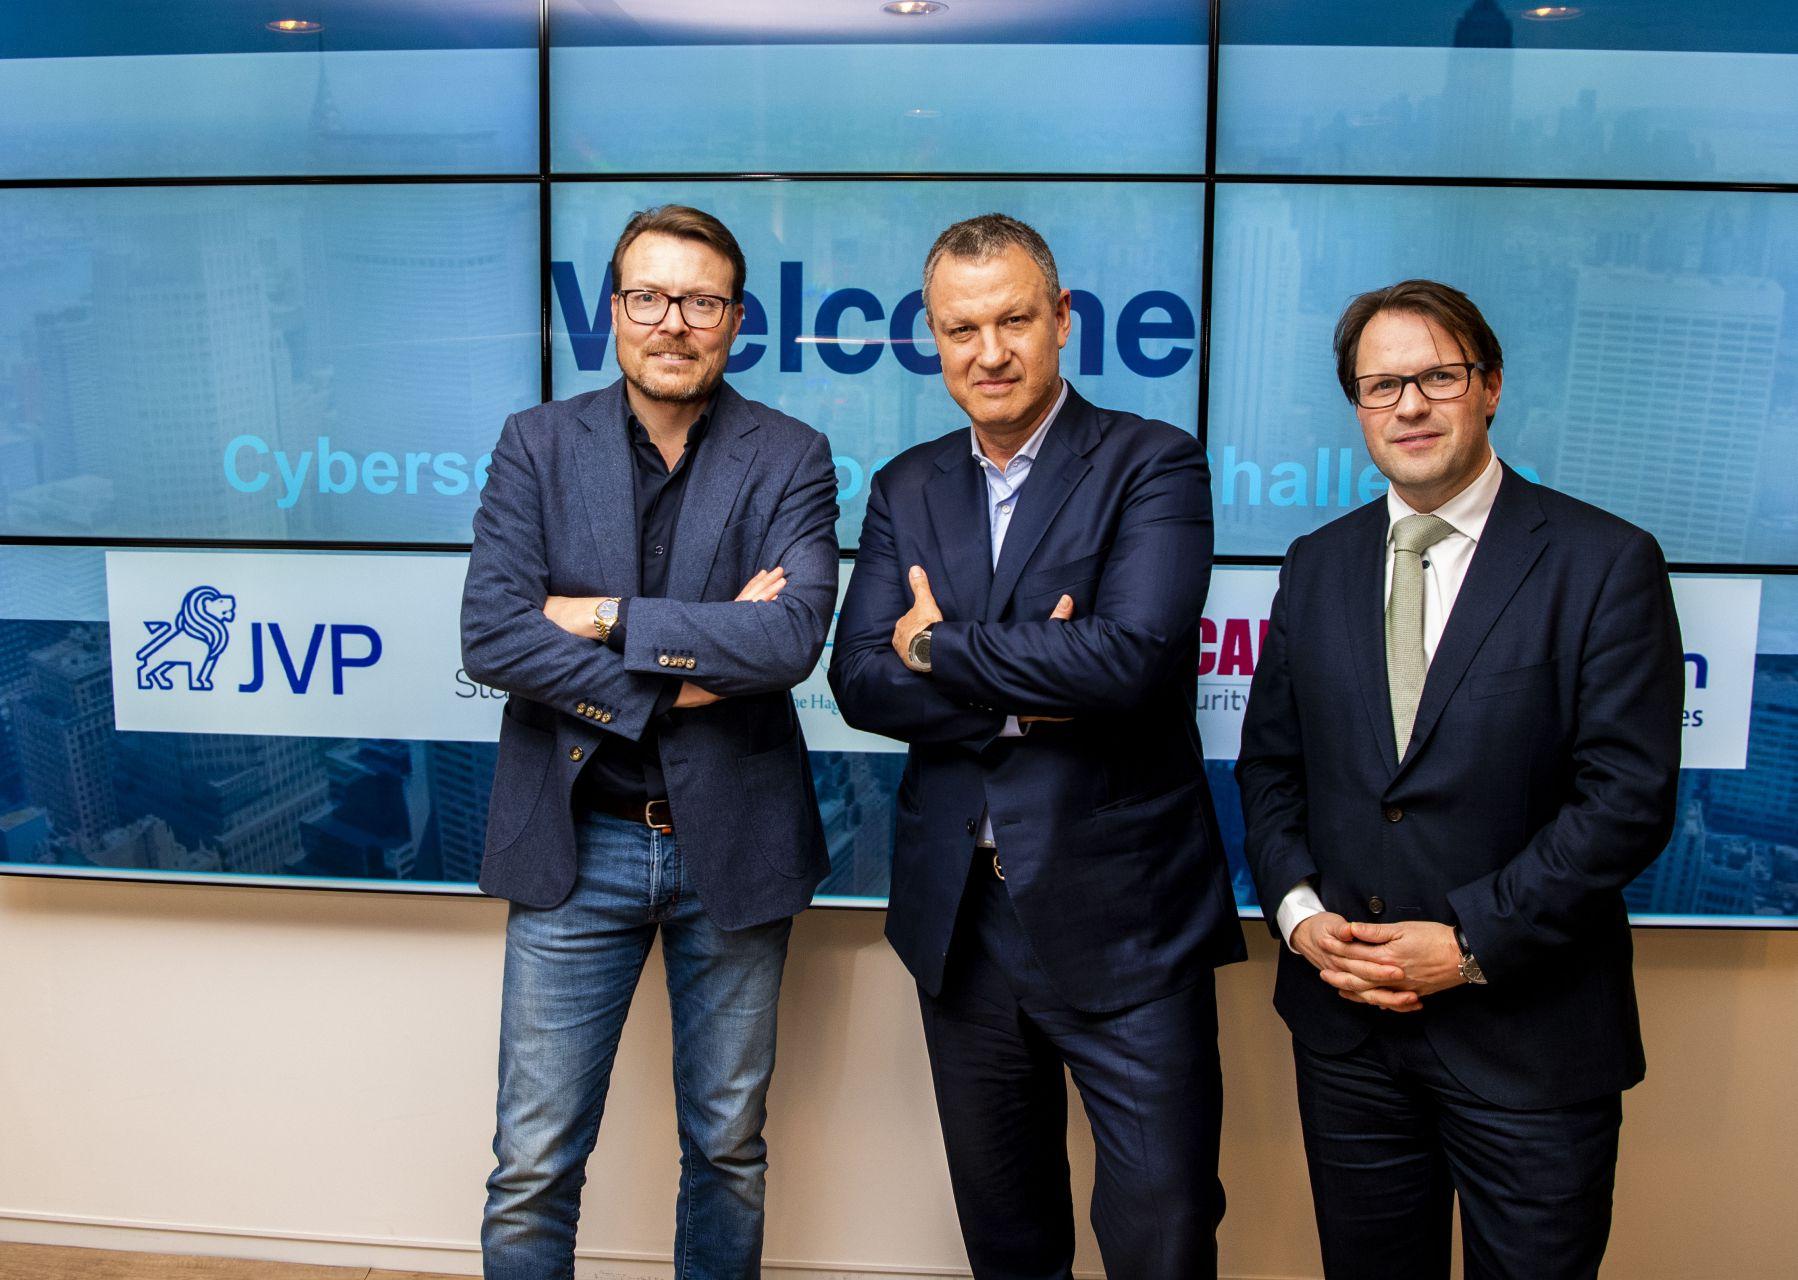 Israël, New York City and the Netherlands Forge Cybersecurity Partnership